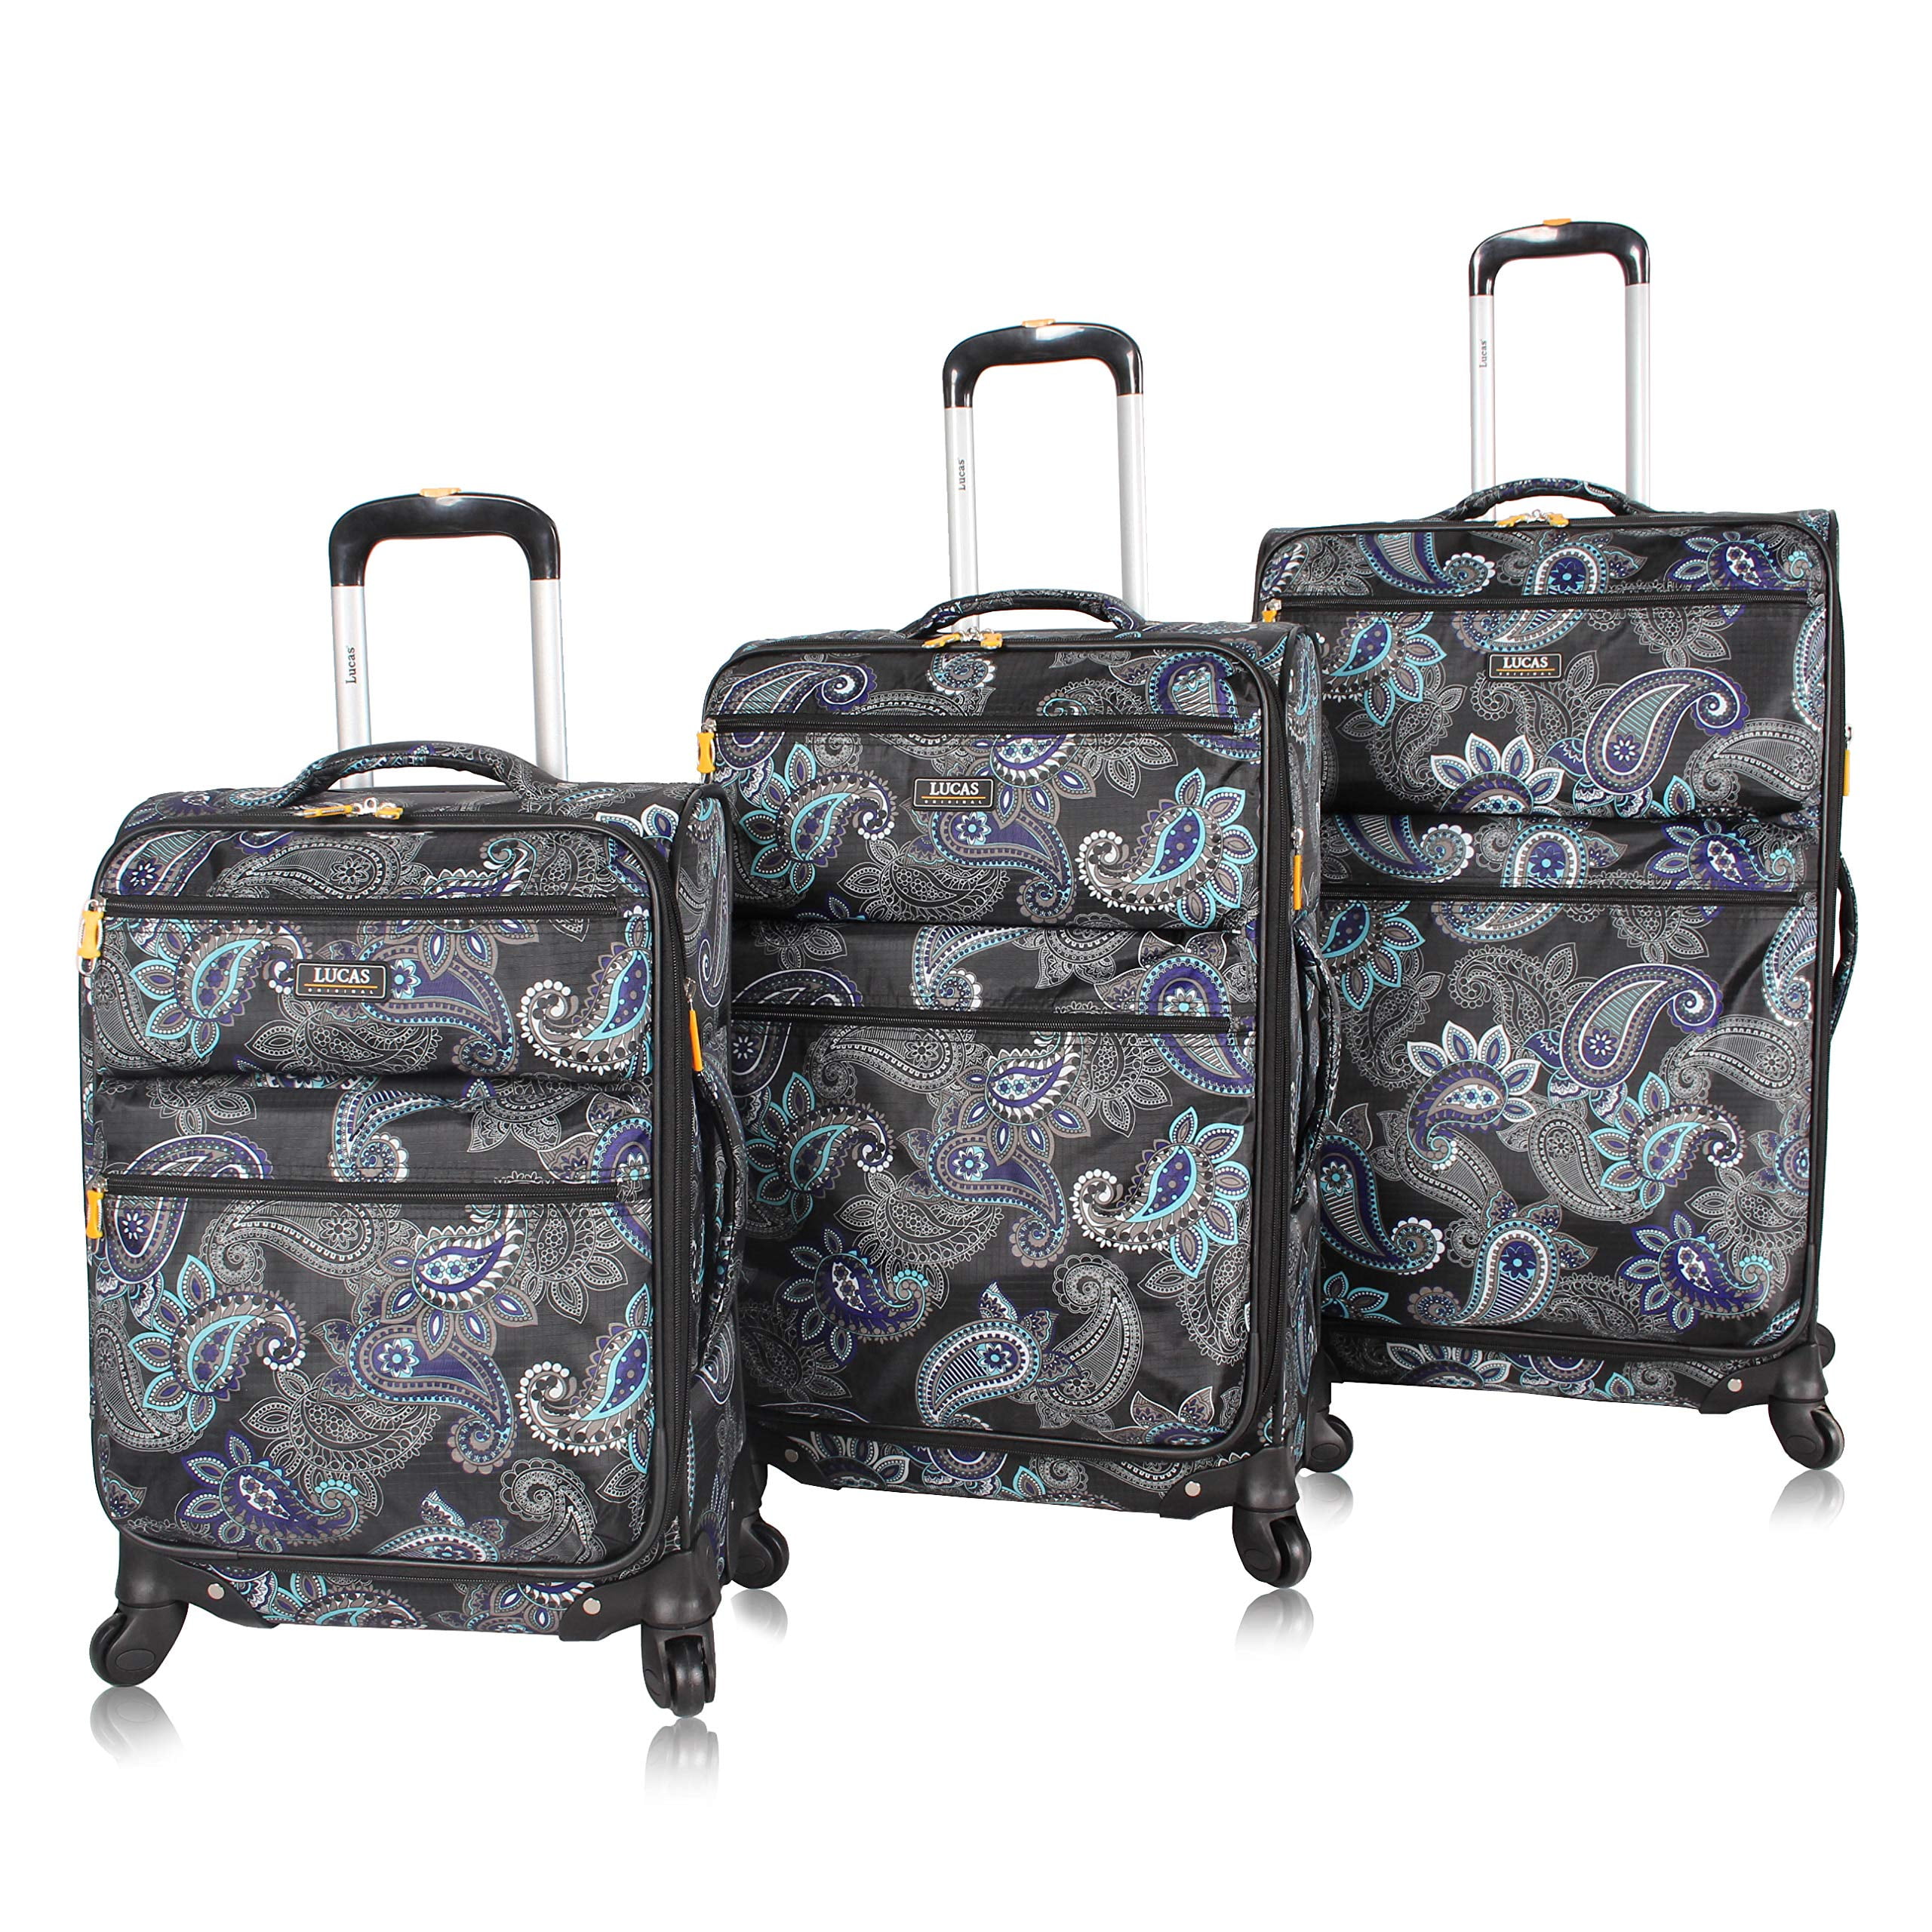 24 Inch & 28 Inch Checked Suitcases 3 Piece Softside Expandable Ultra Lightweight Spinner Suitcase Set Travel Set includes 20 Inch Carry On Diva Lucas Designer Luggage Collection 